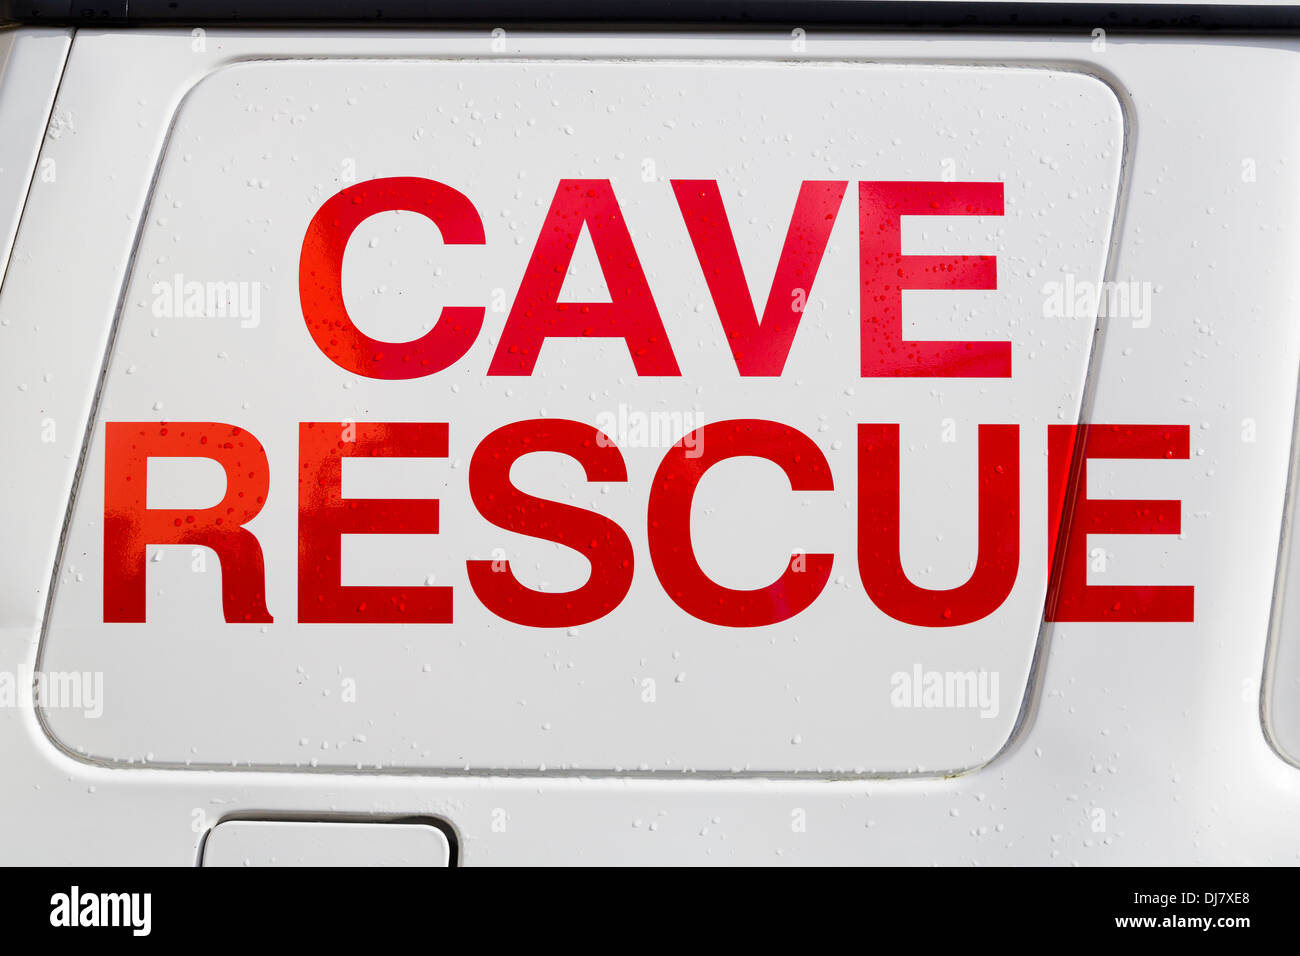 Irish Cave Rescue Organisation sign on side of Land Rover Stock Photo